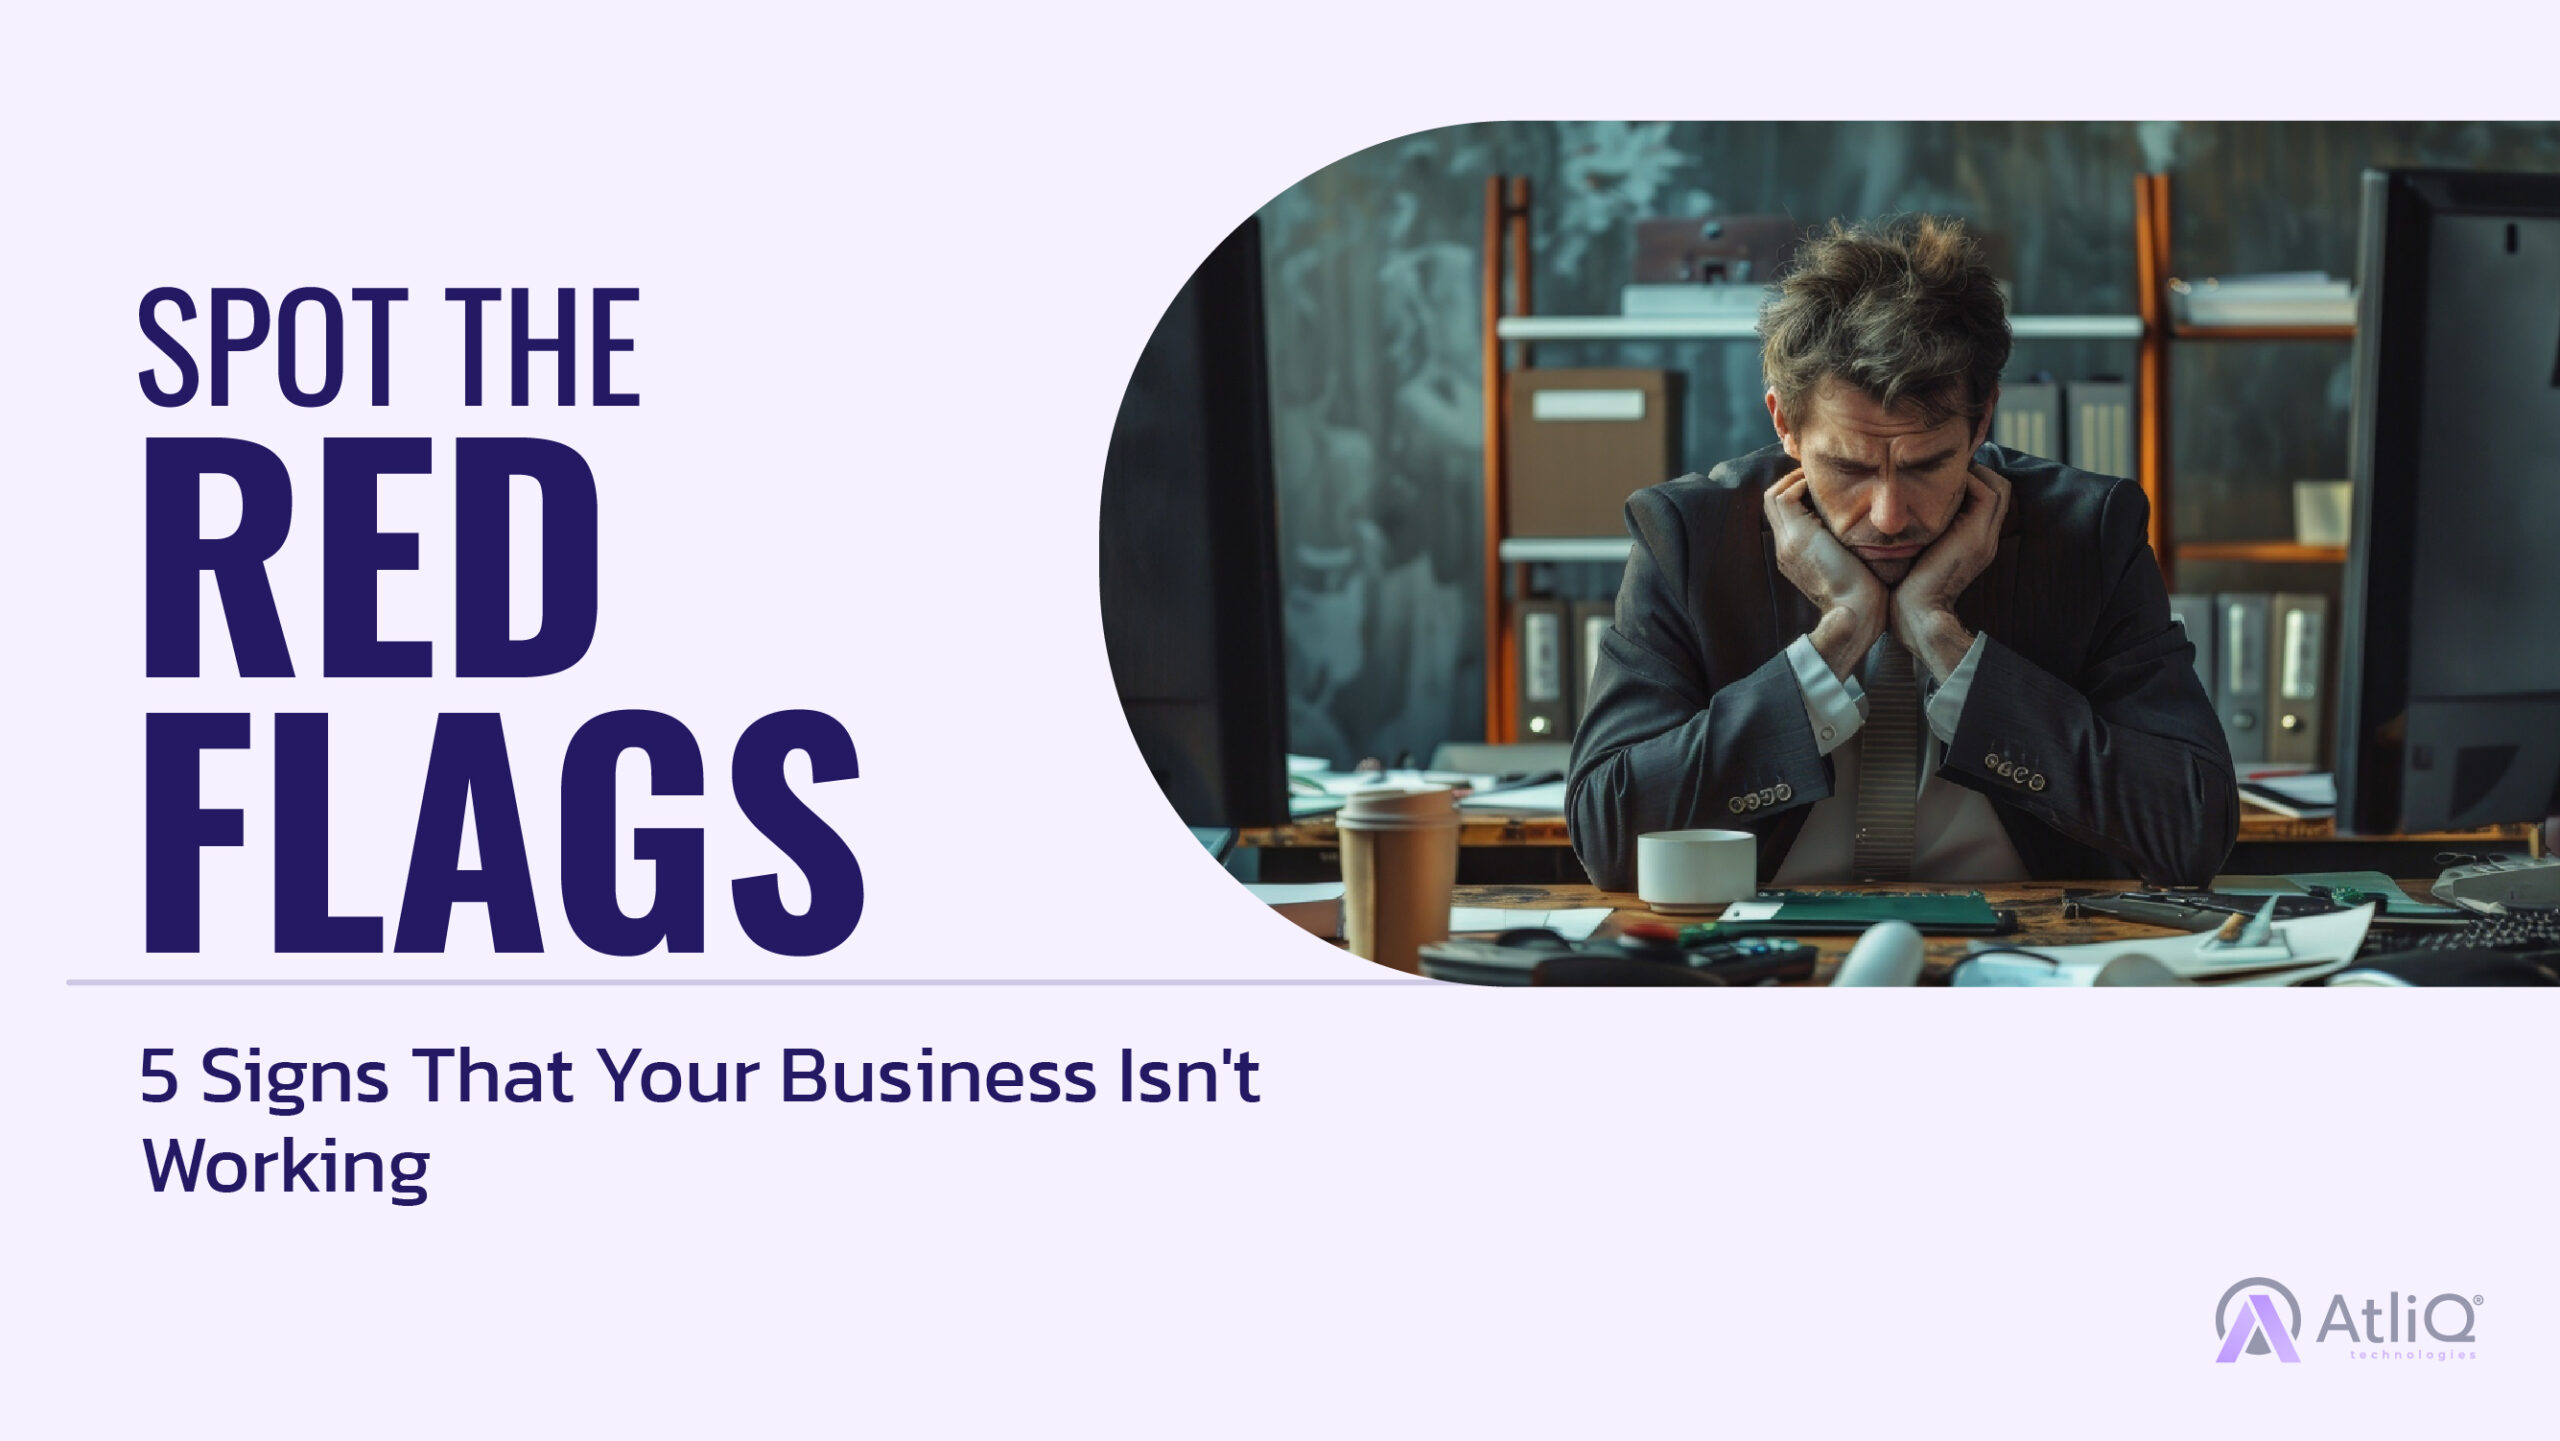 5 Signs Your Business Isn't Working & How to Fix Them